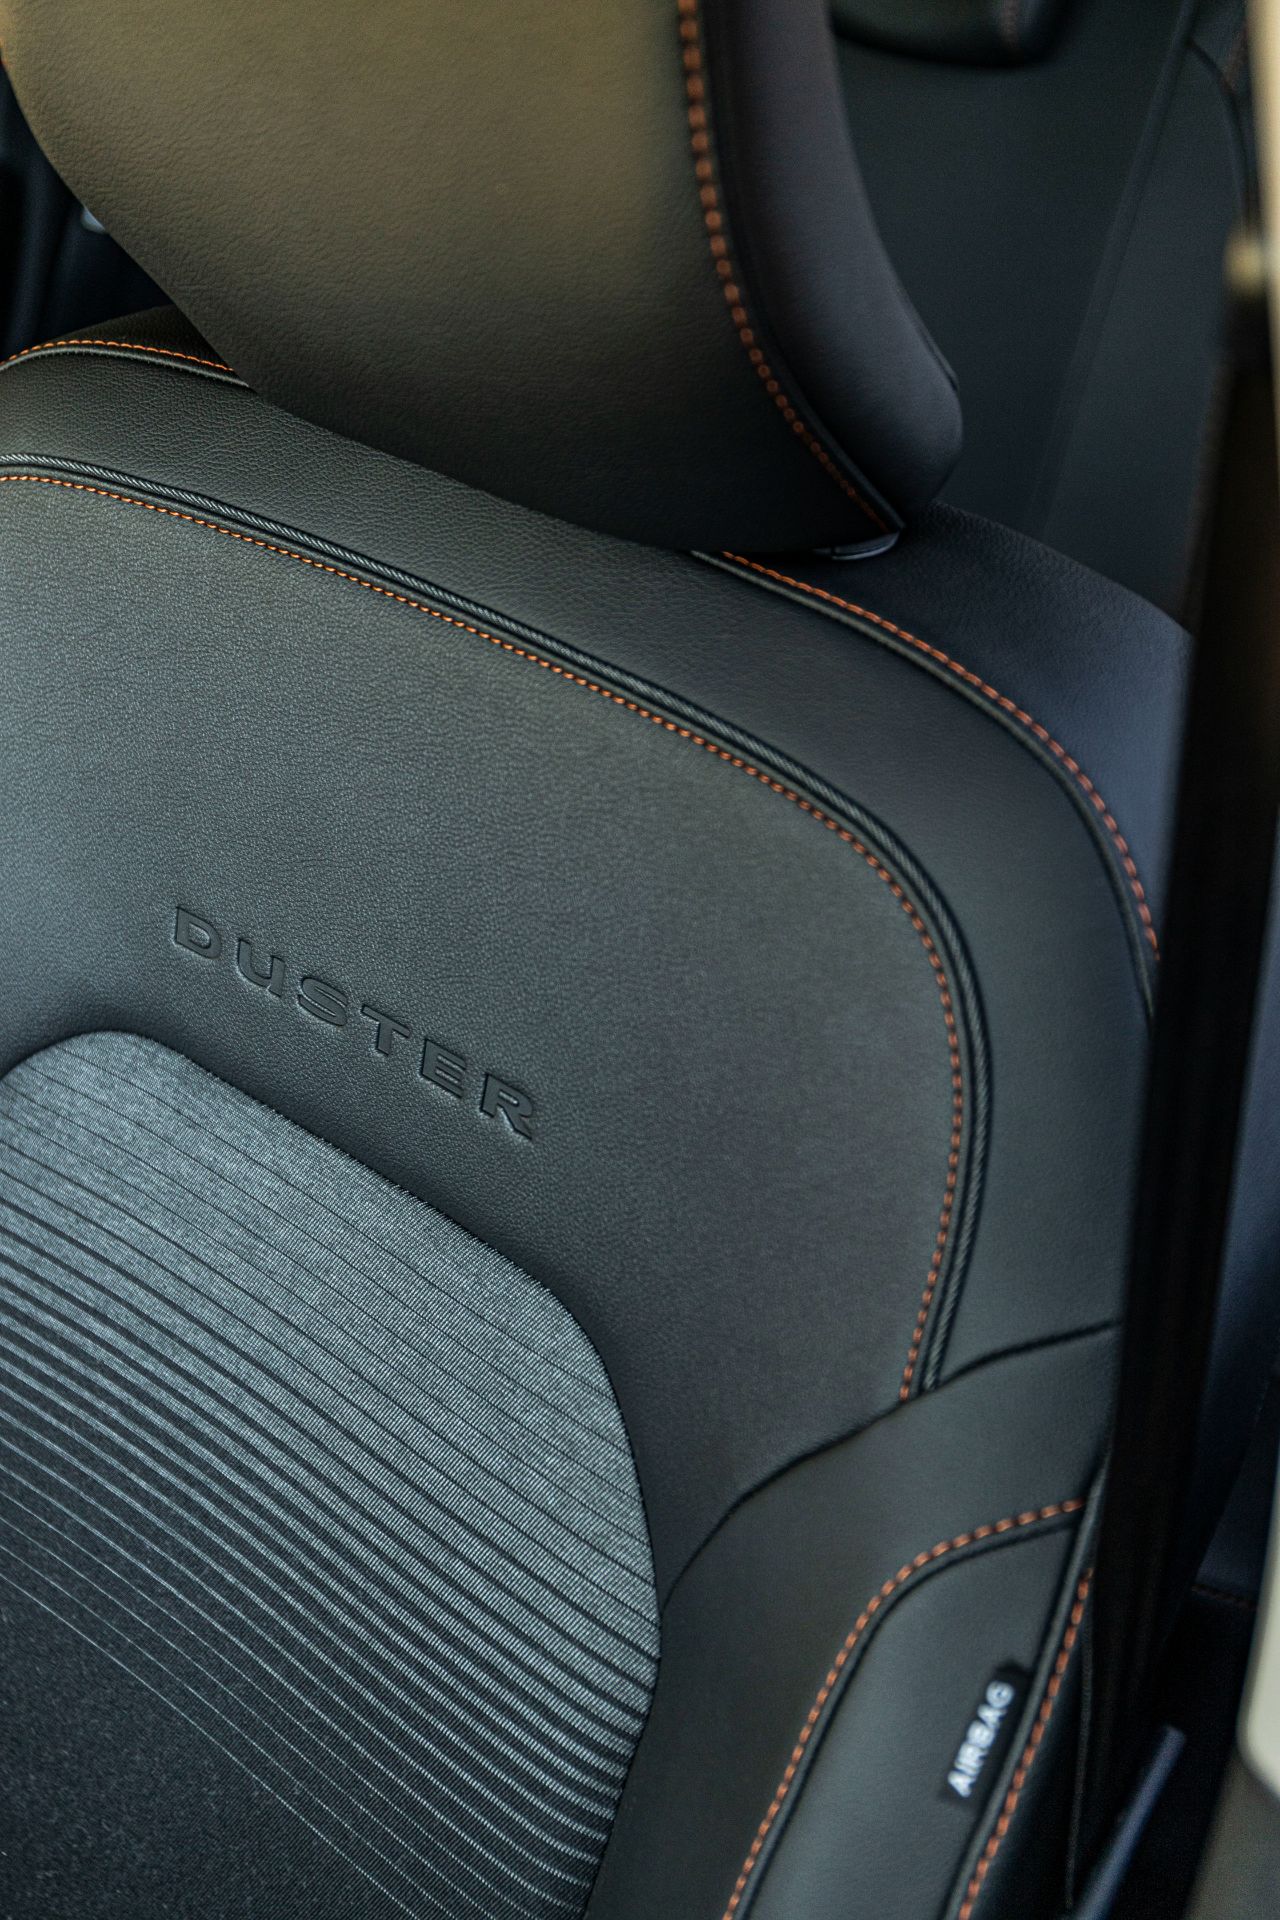 2022 Dacia Duster Extreme Interior Seats Wallpapers #41 of 42